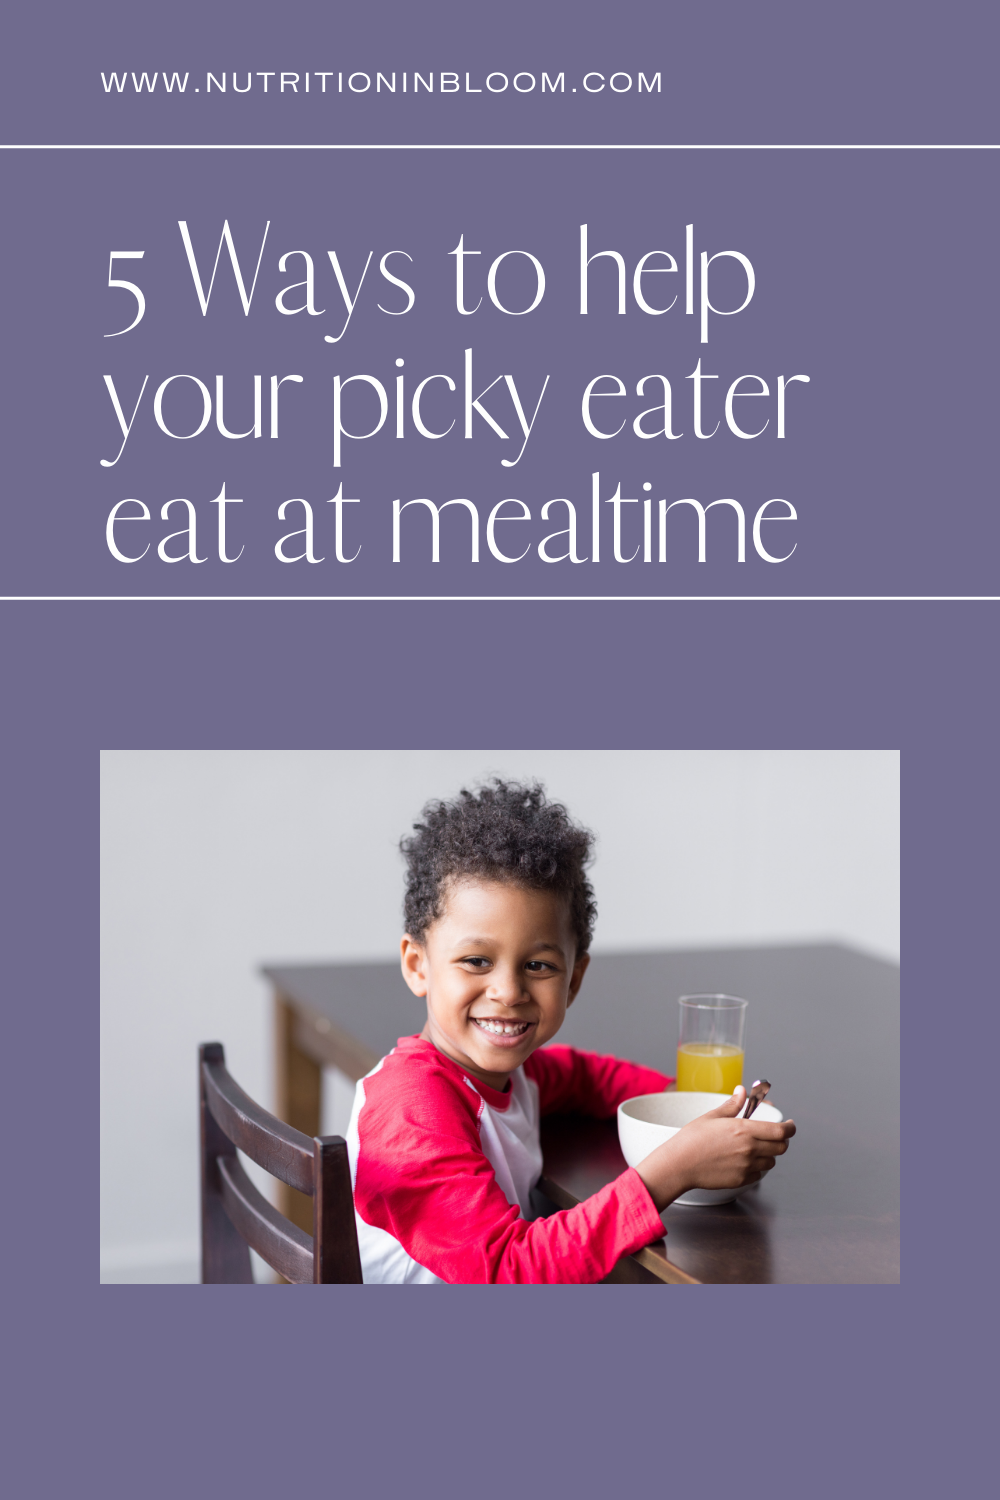 5 ways to help your picky eater eat at mealtimes